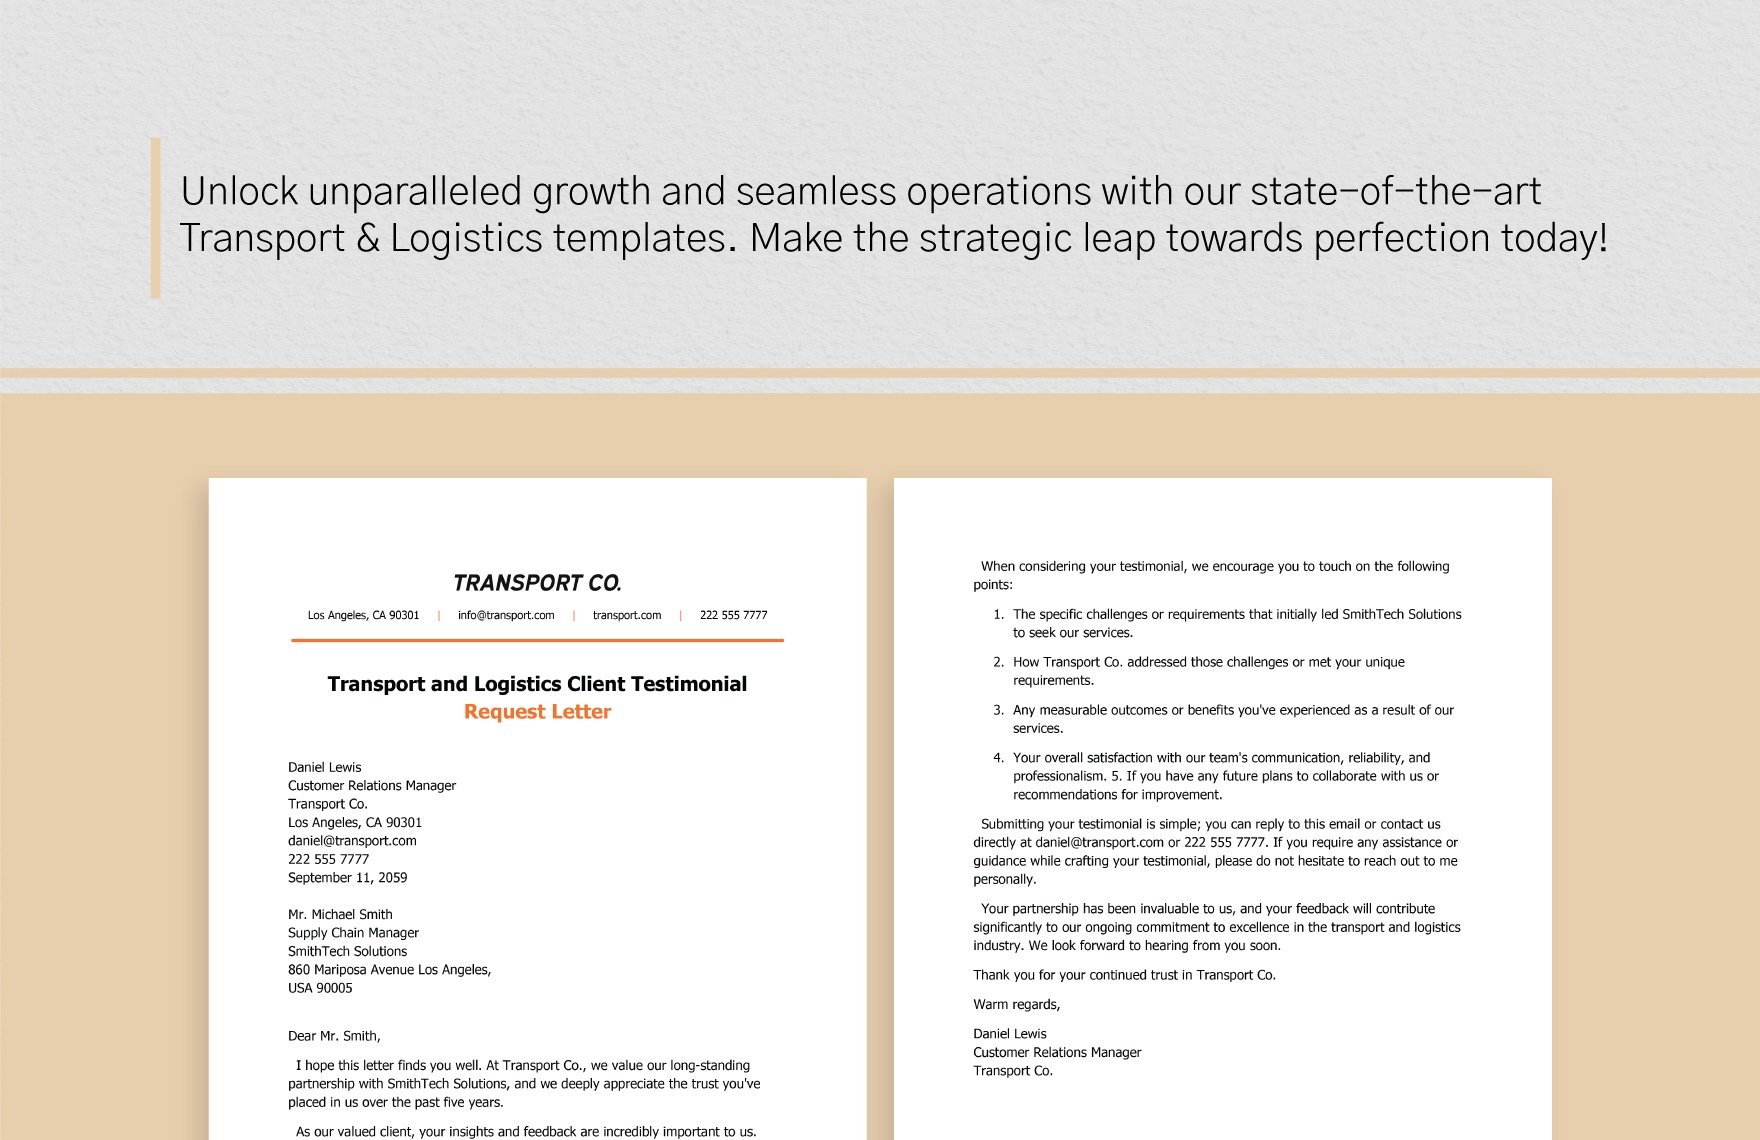 Transport and Logistics Client Testimonial Request Letter Template